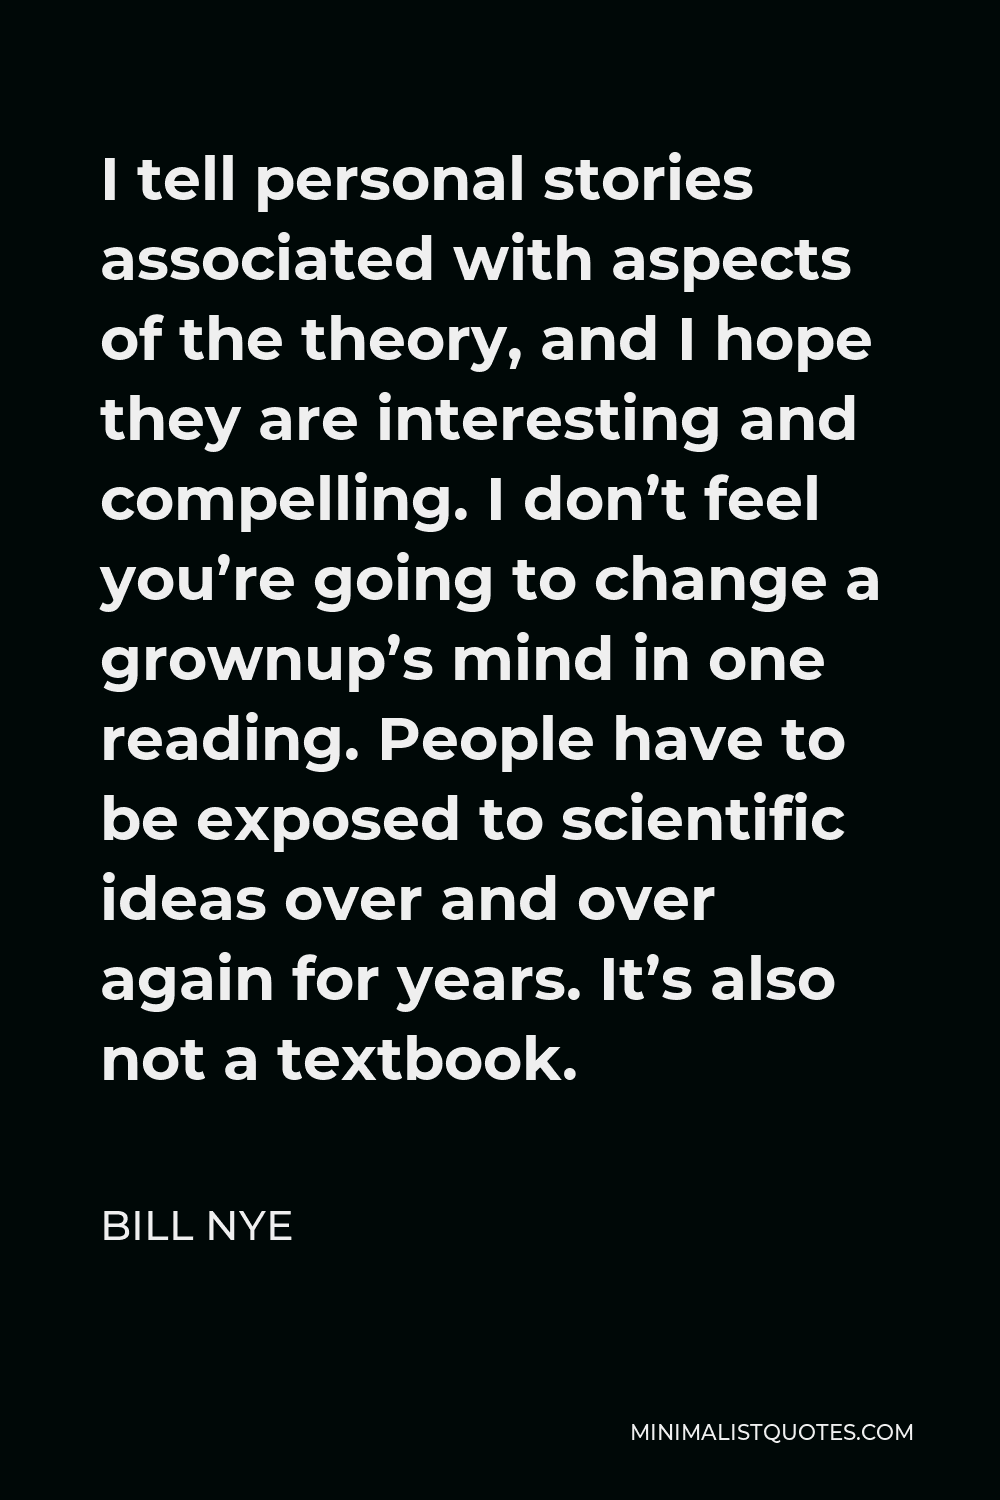 Bill Nye Quote - I tell personal stories associated with aspects of the theory, and I hope they are interesting and compelling. I don’t feel you’re going to change a grownup’s mind in one reading. People have to be exposed to scientific ideas over and over again for years. It’s also not a textbook.